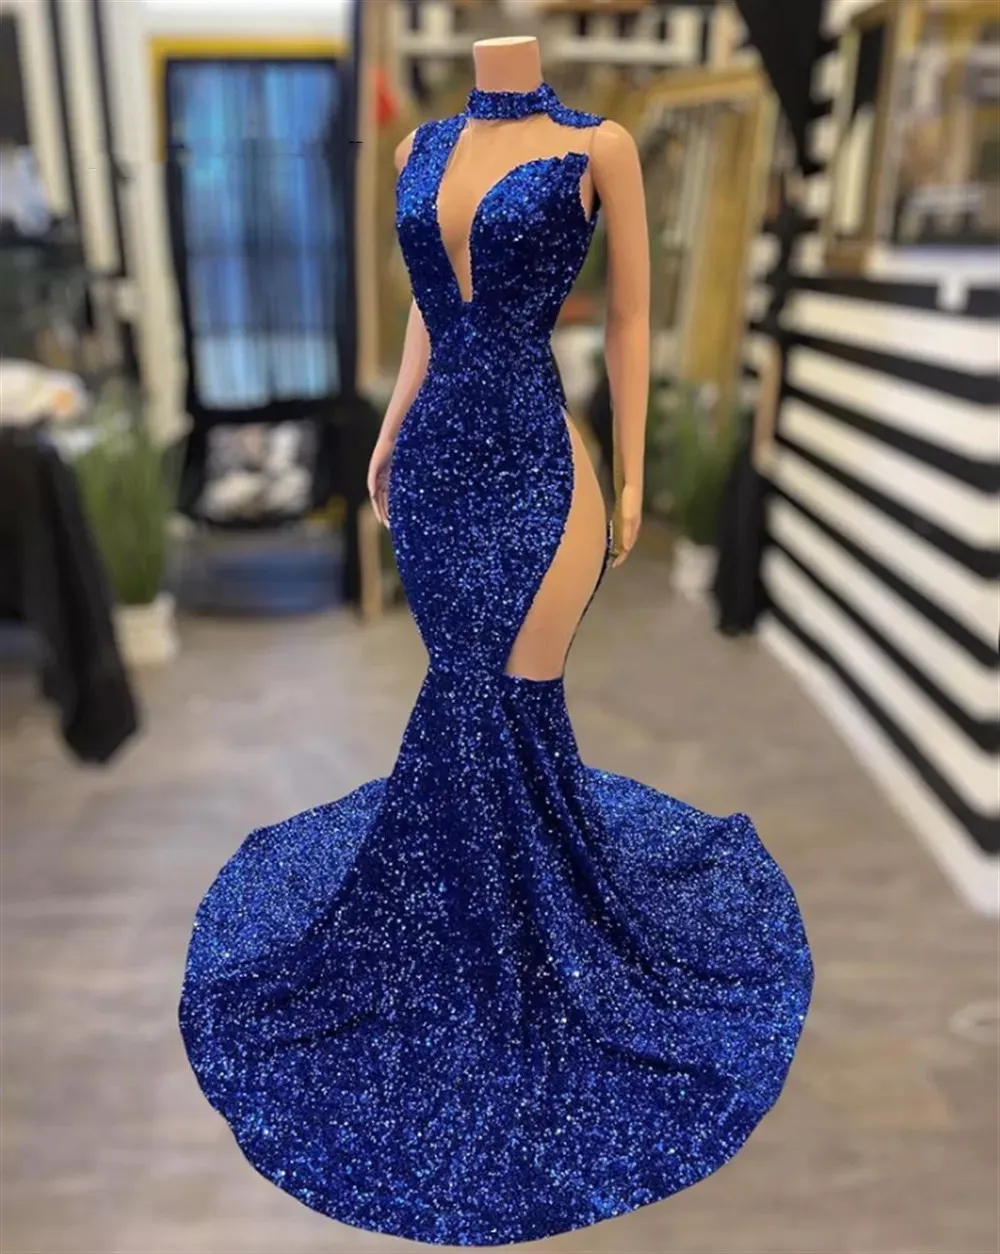 Navy Blue Black Gold Quinceanera Dresses With Sparkling Beading, Gold Lace  Appliques, And Bow Perfect For Formal Luxury Parties, Sweet 15, Graduation,  Or Ball Gowns From Zaomeng321, $284.79 | DHgate.Com